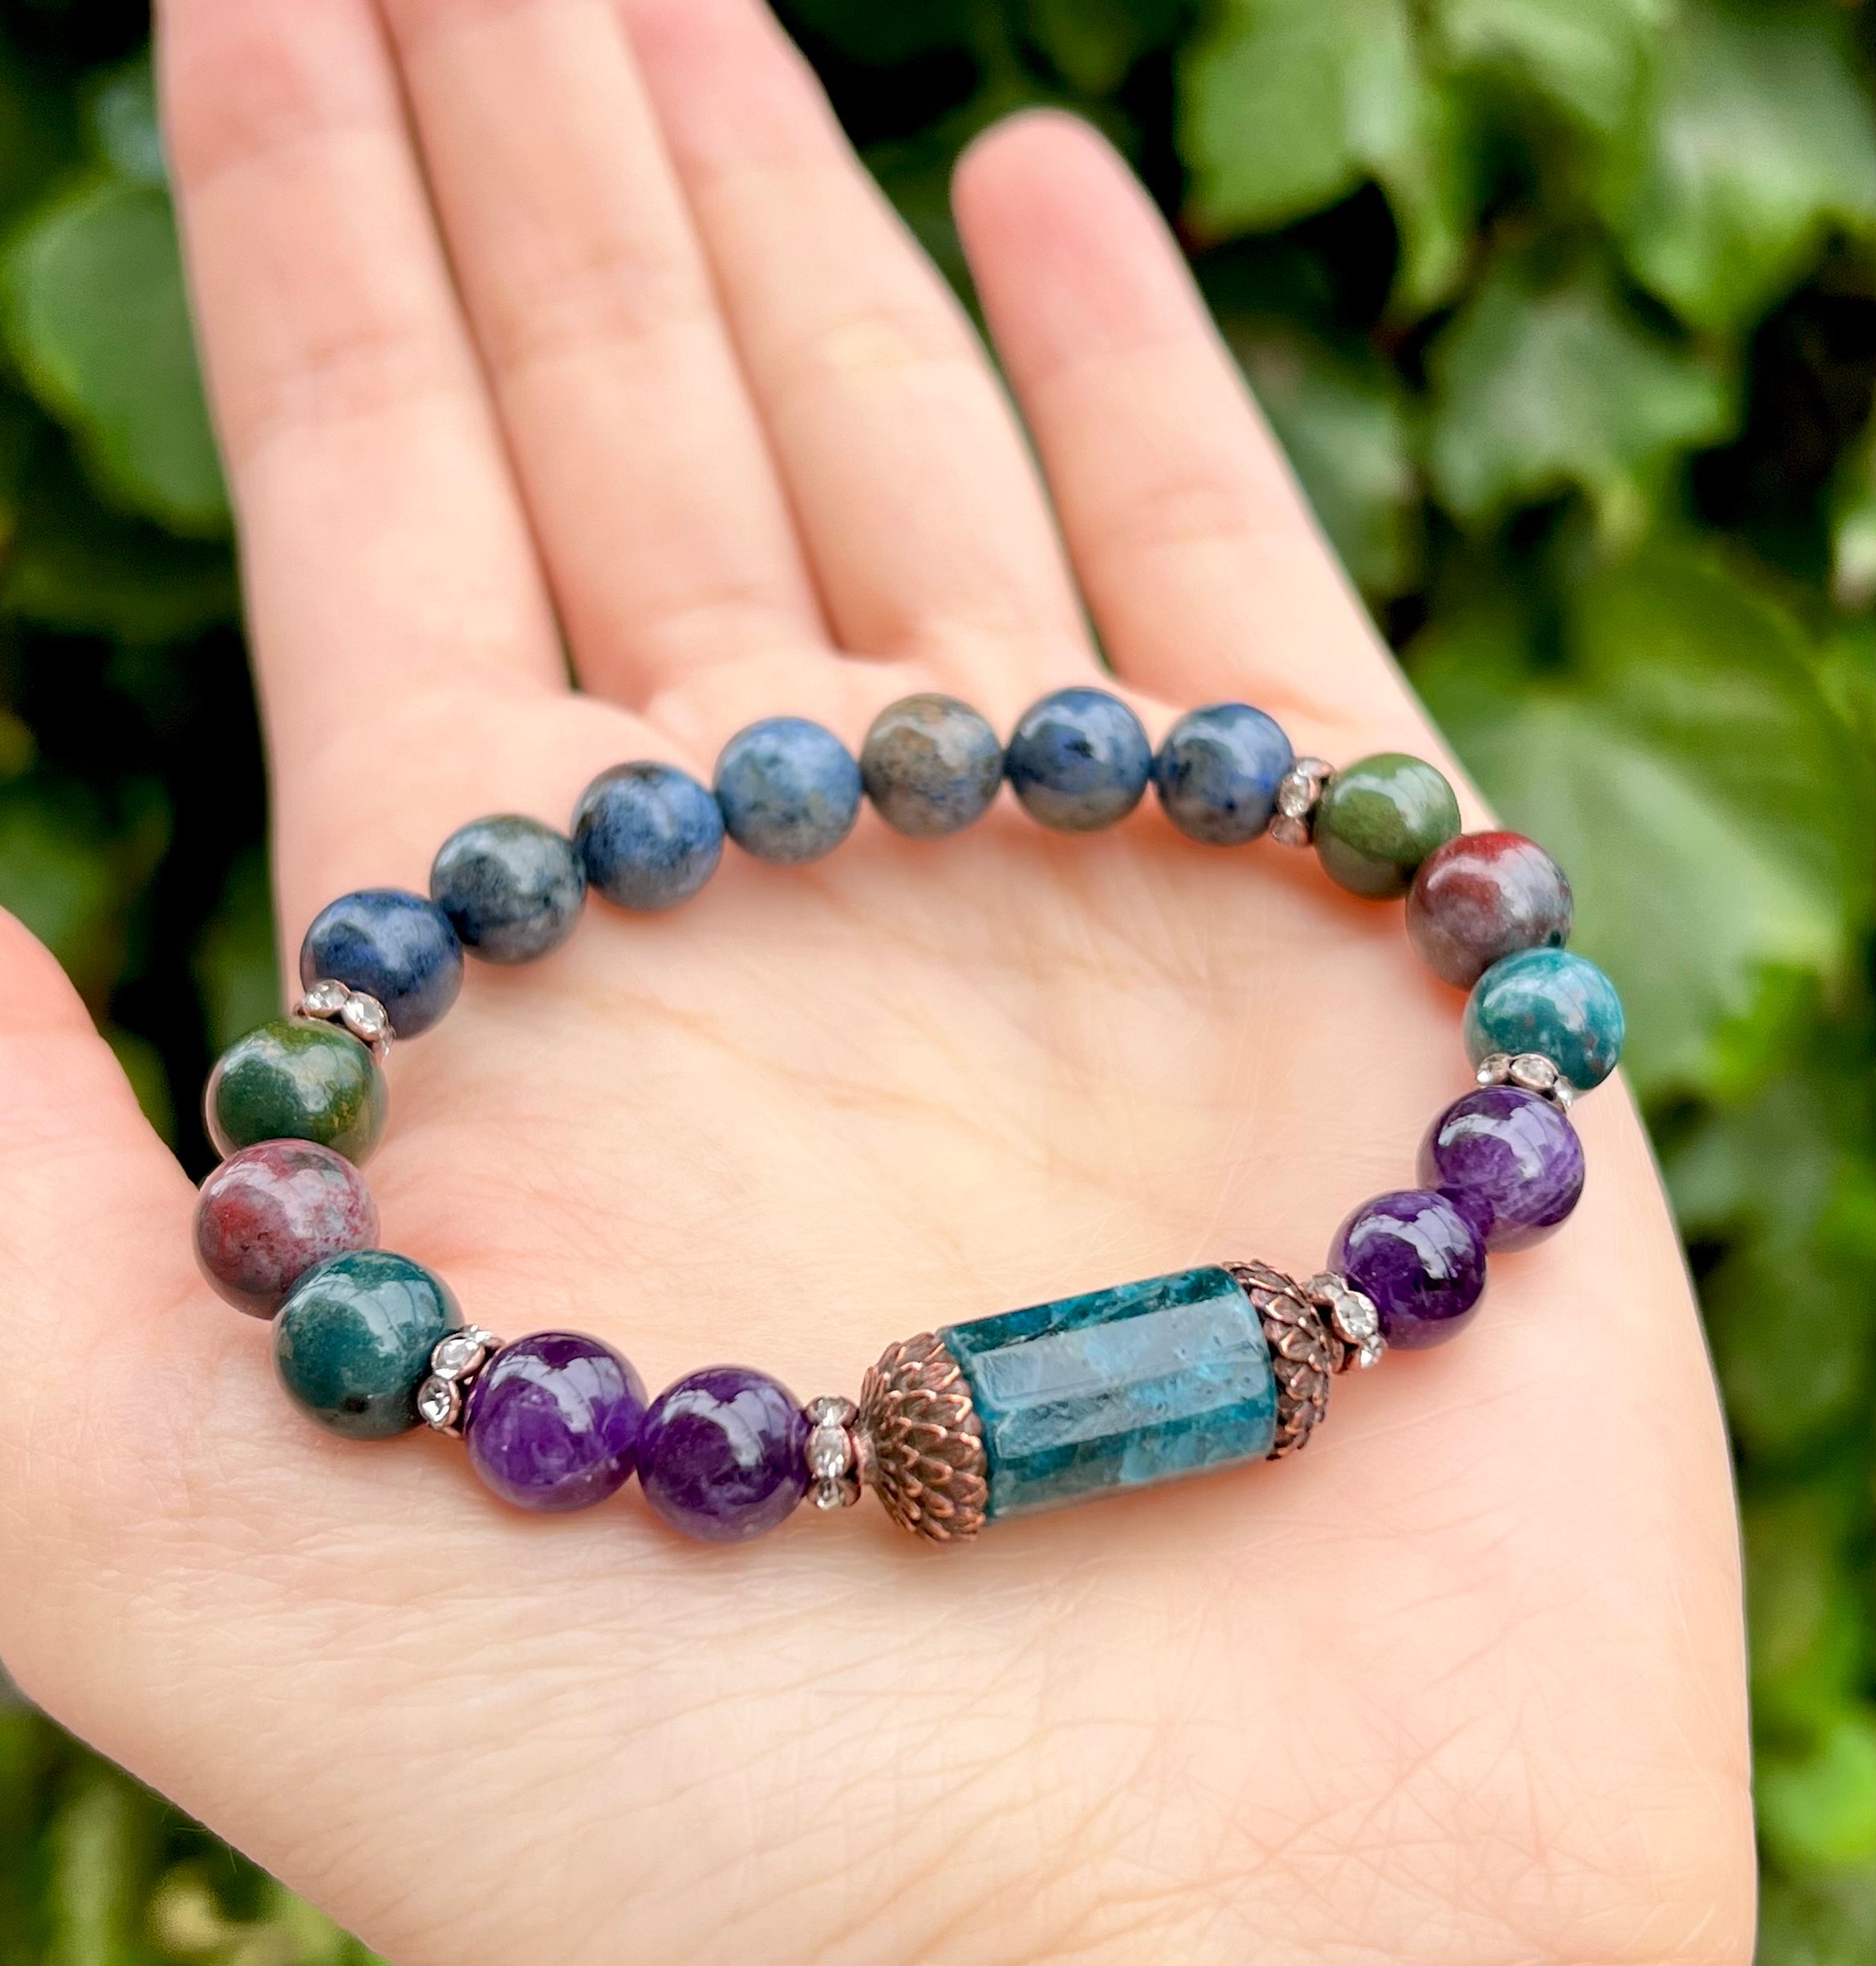 bloodstone jewelry bracelet for protection